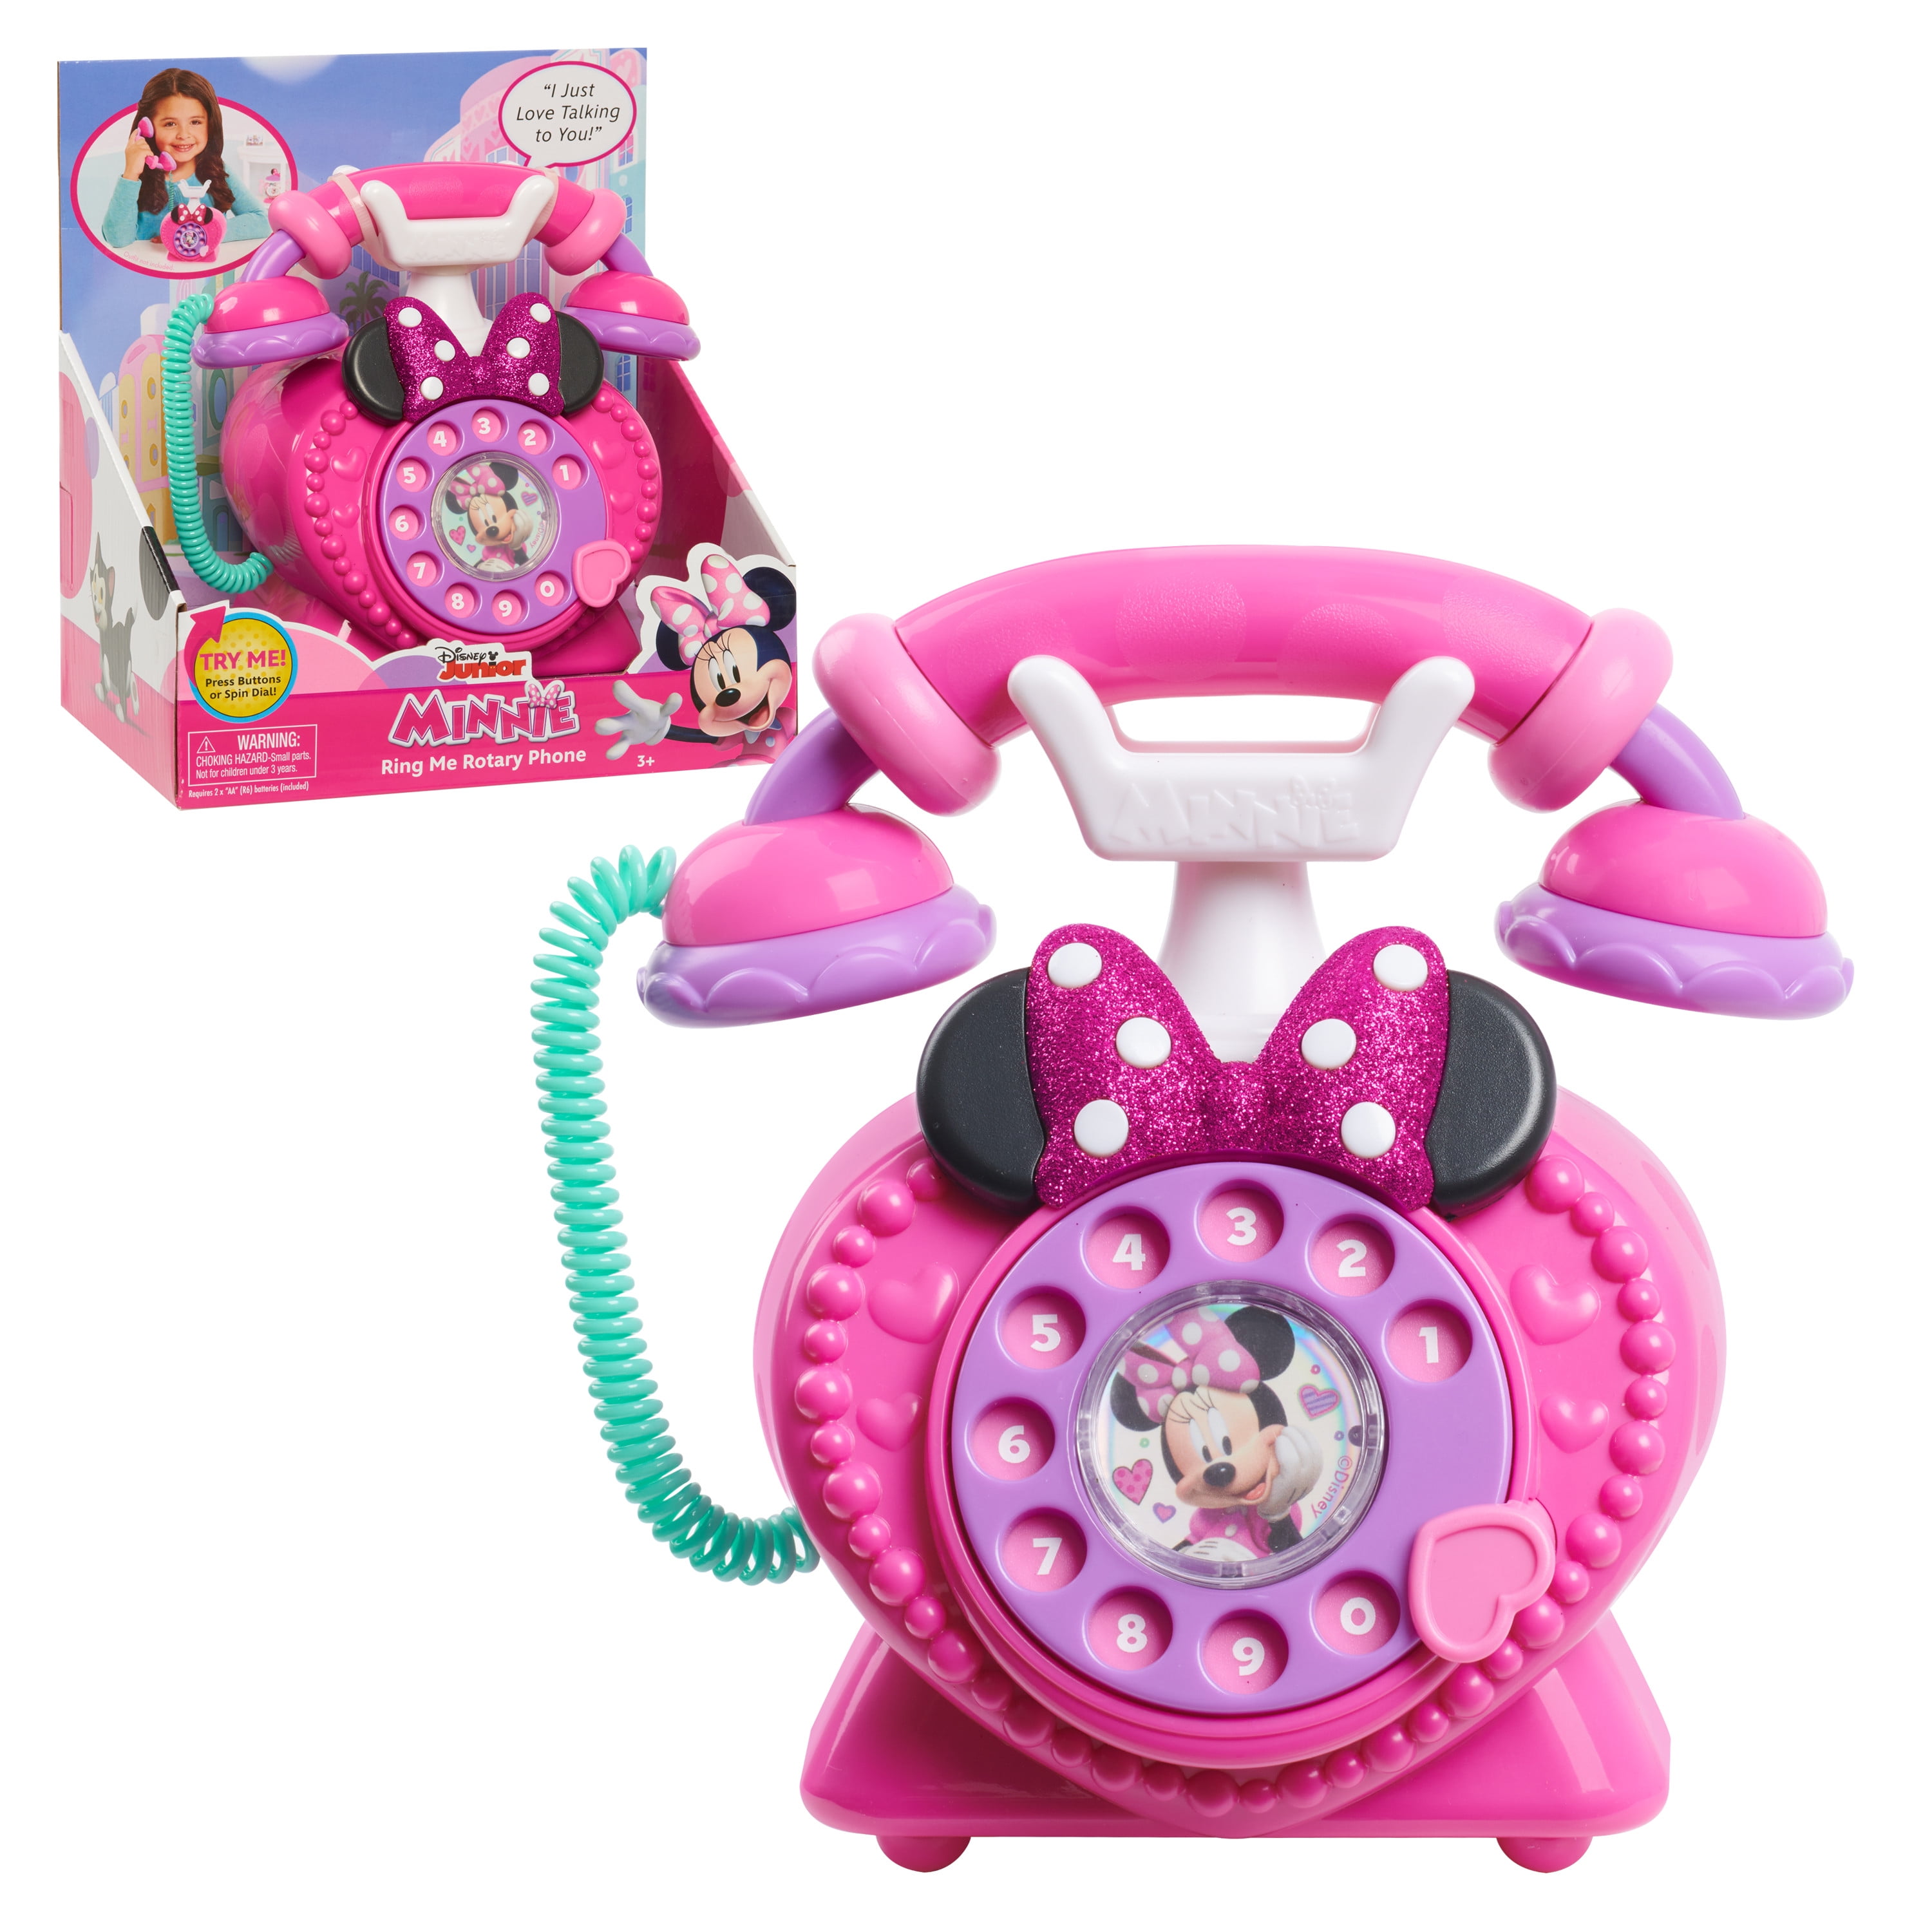 Makes Fun noises & Rings My First Smart Phone for Children 3 Battery included 